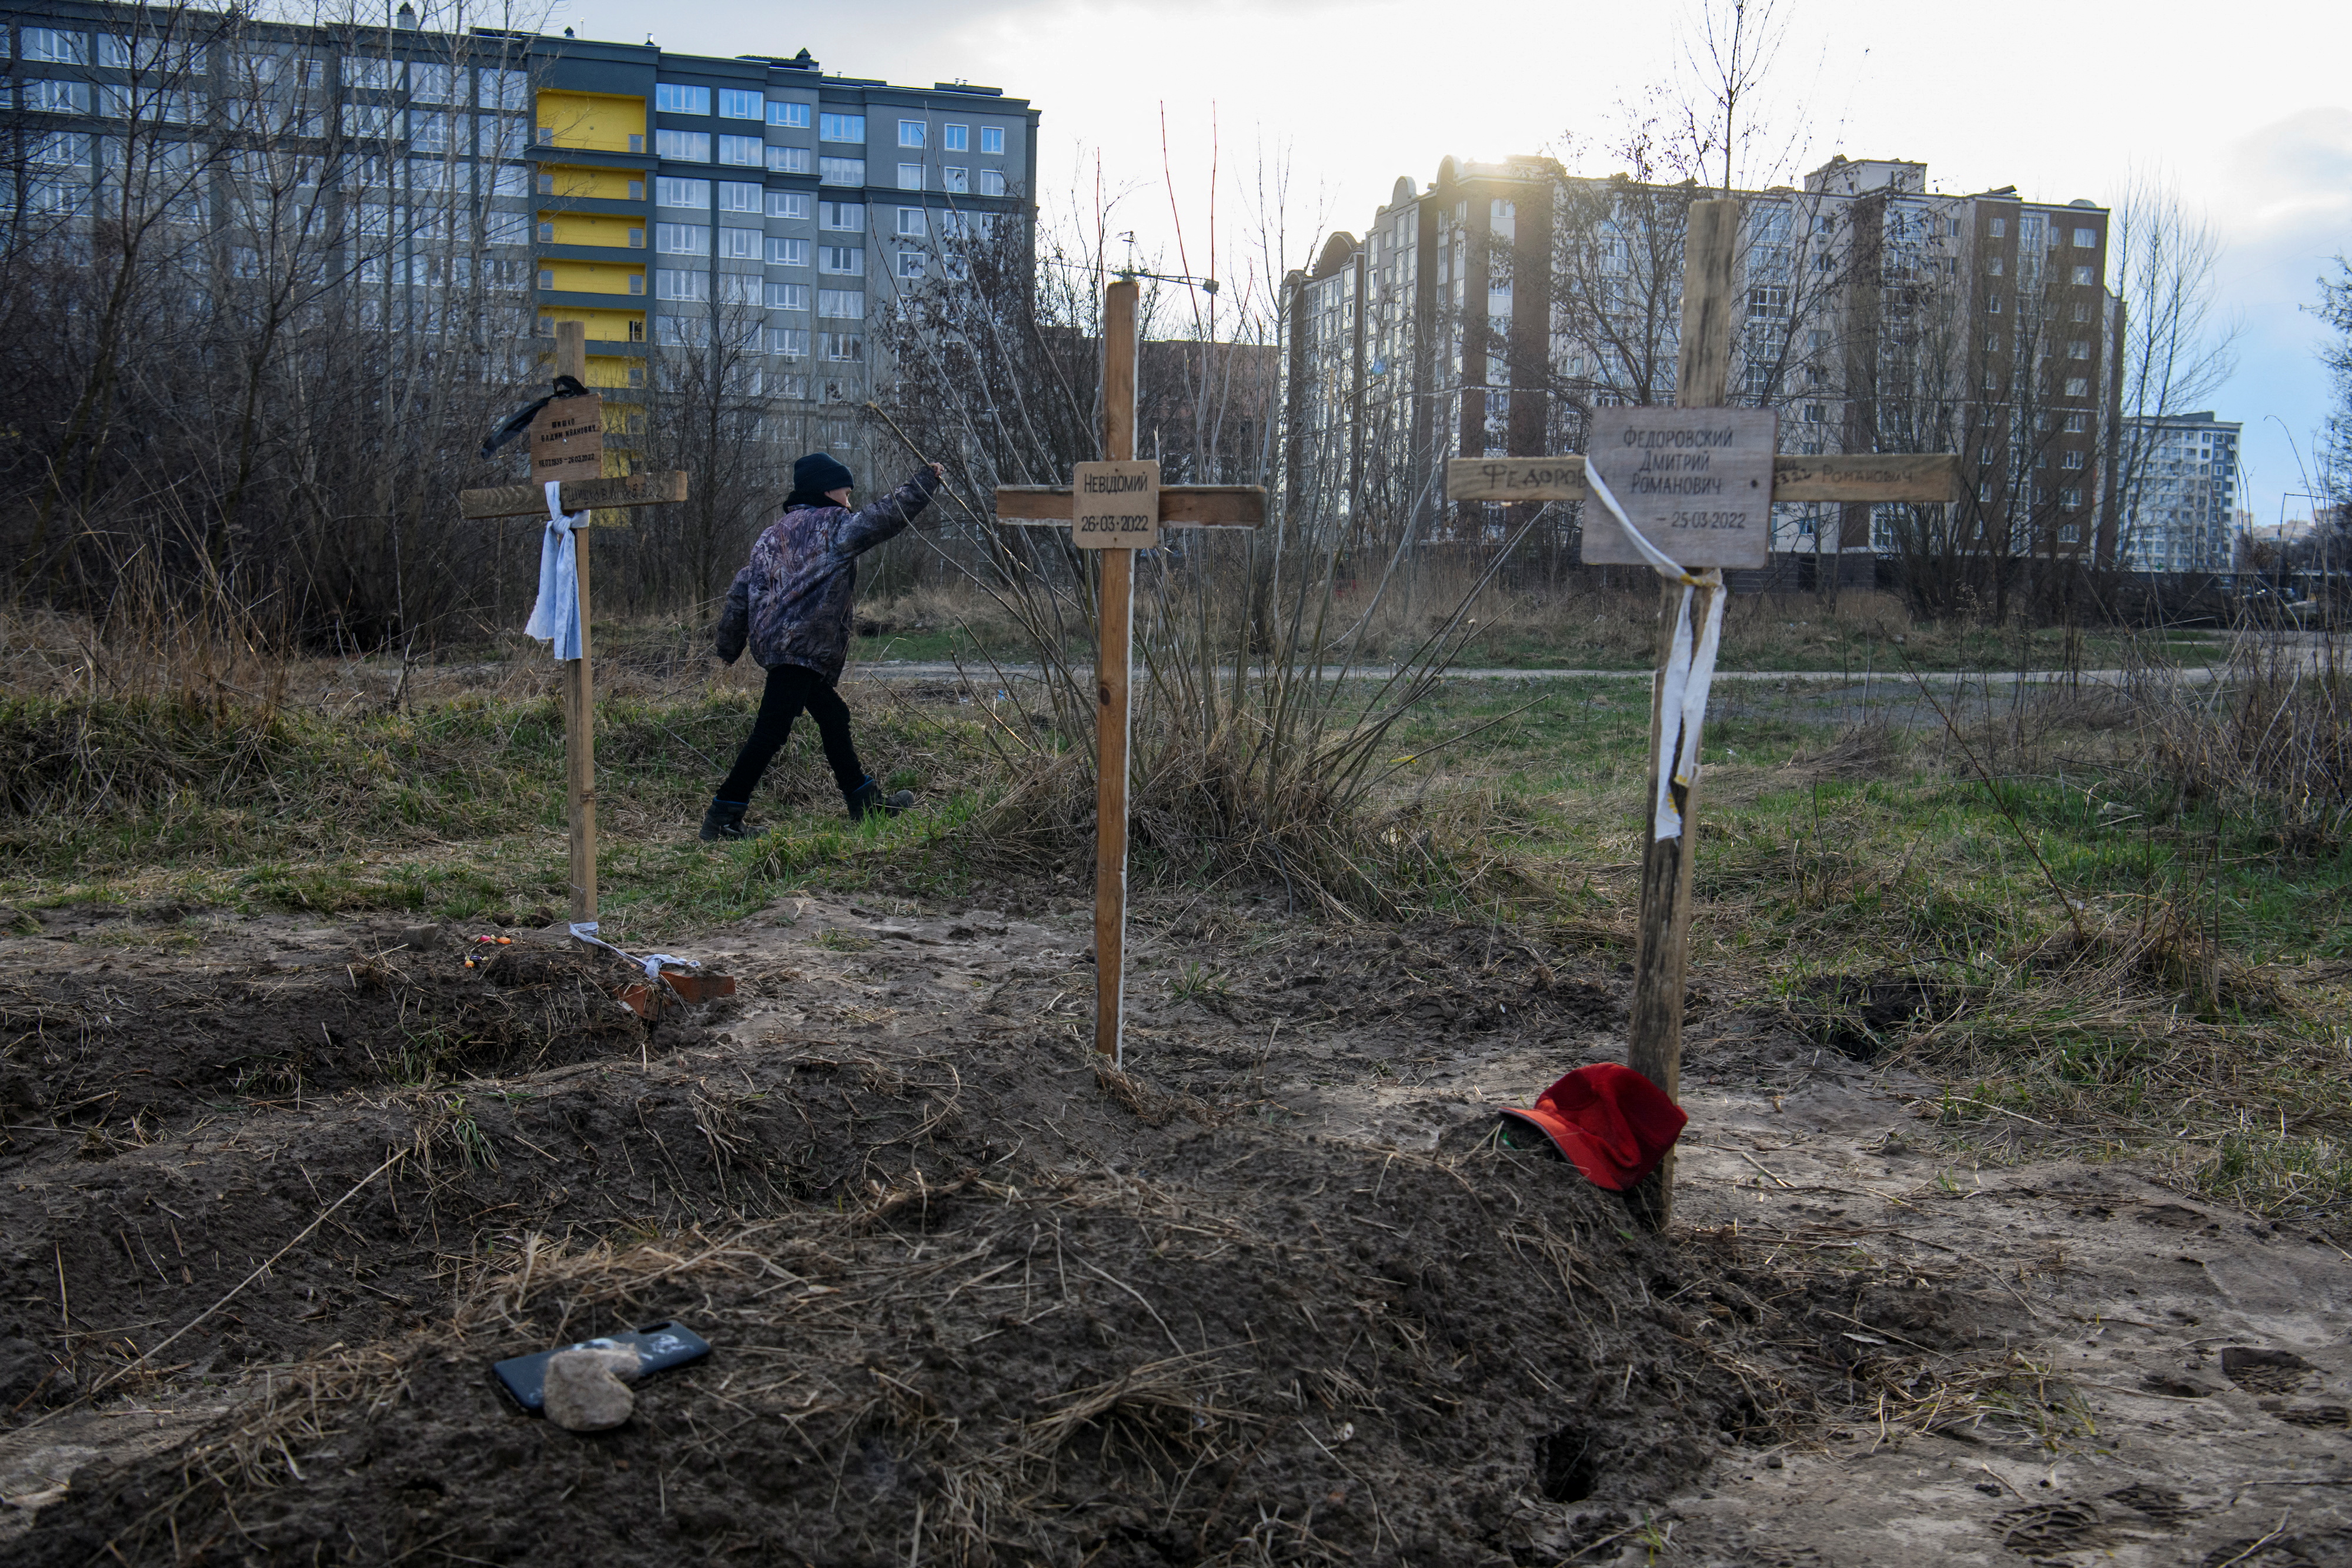 A boy walks past graves with bodies of civilians, who according to local residents were killed by Russian soldiers, in Bucha